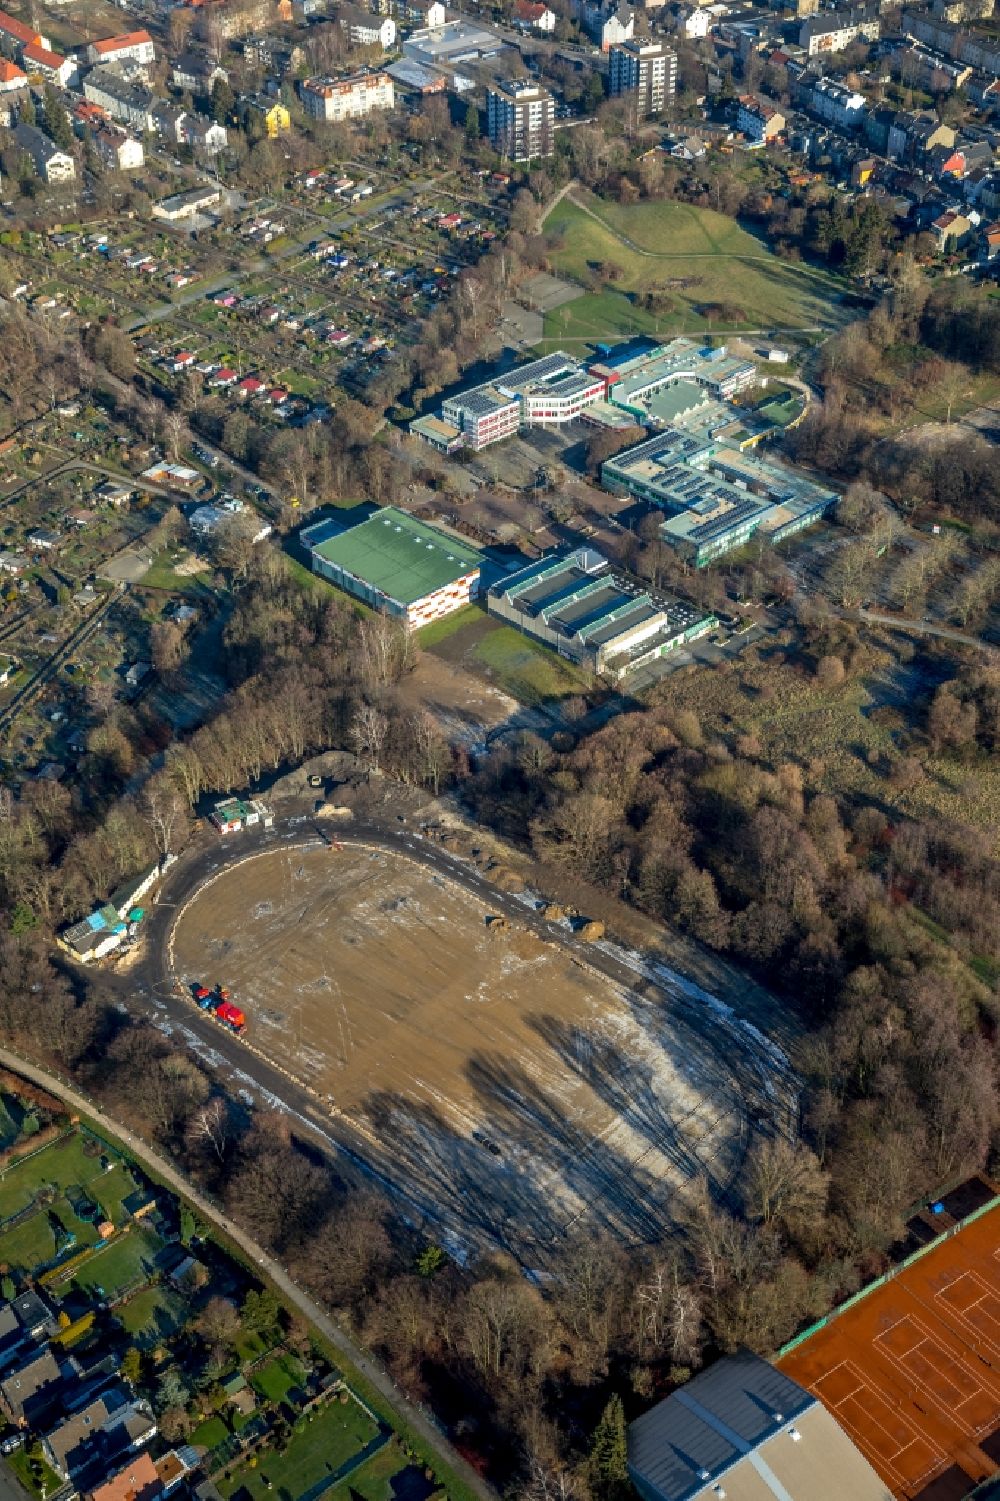 Aerial photograph Dortmund - School grounds and buildings of the Goethe-Gymnasiums Dortmund on Stettiner Strasse in the district Bruecherhof in Dortmund in the state North Rhine-Westphalia, Germany